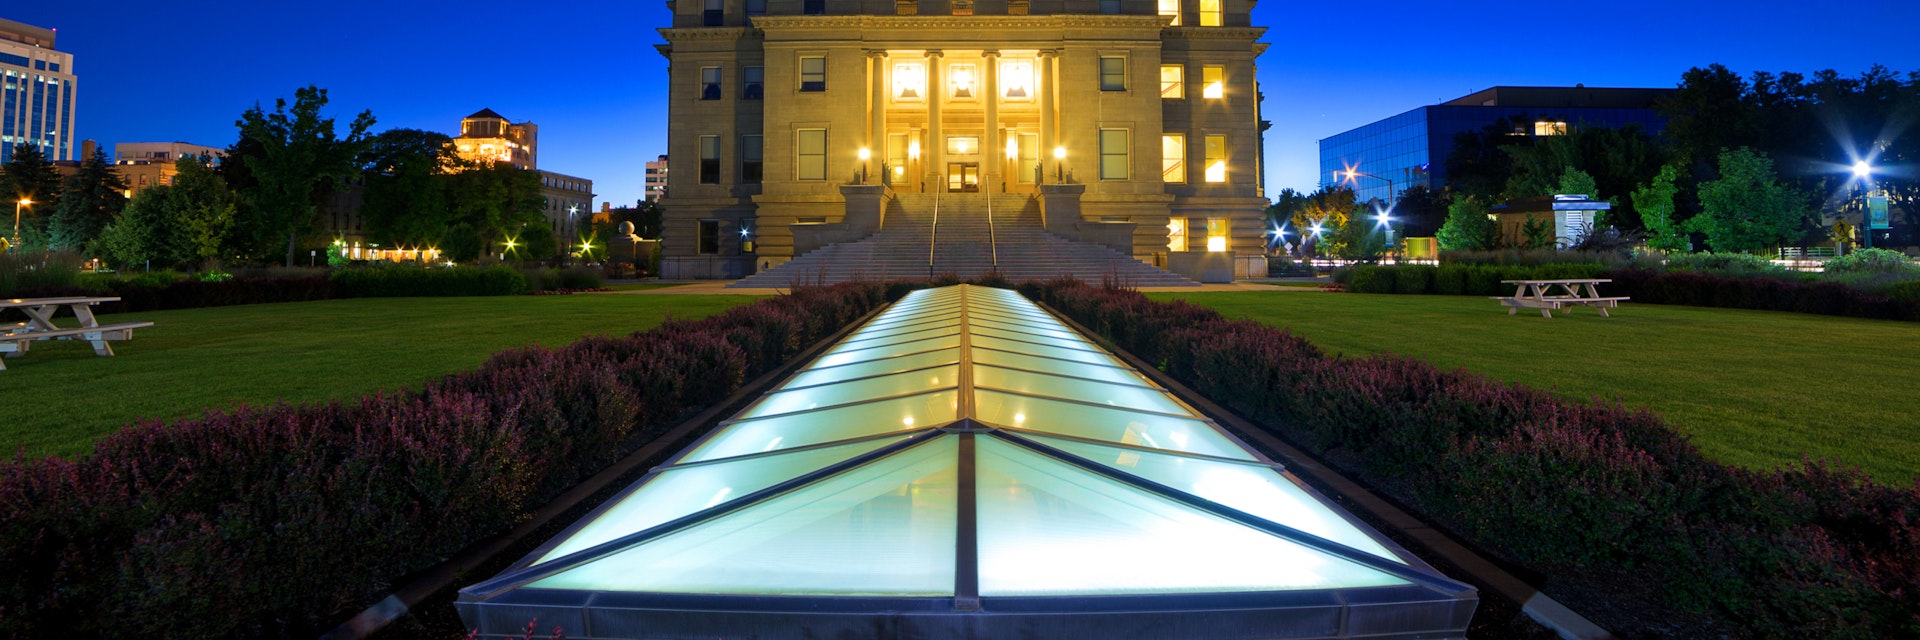 Idaho state capitol building at dusk, wide low angle view with ground-level skylight illuminated.